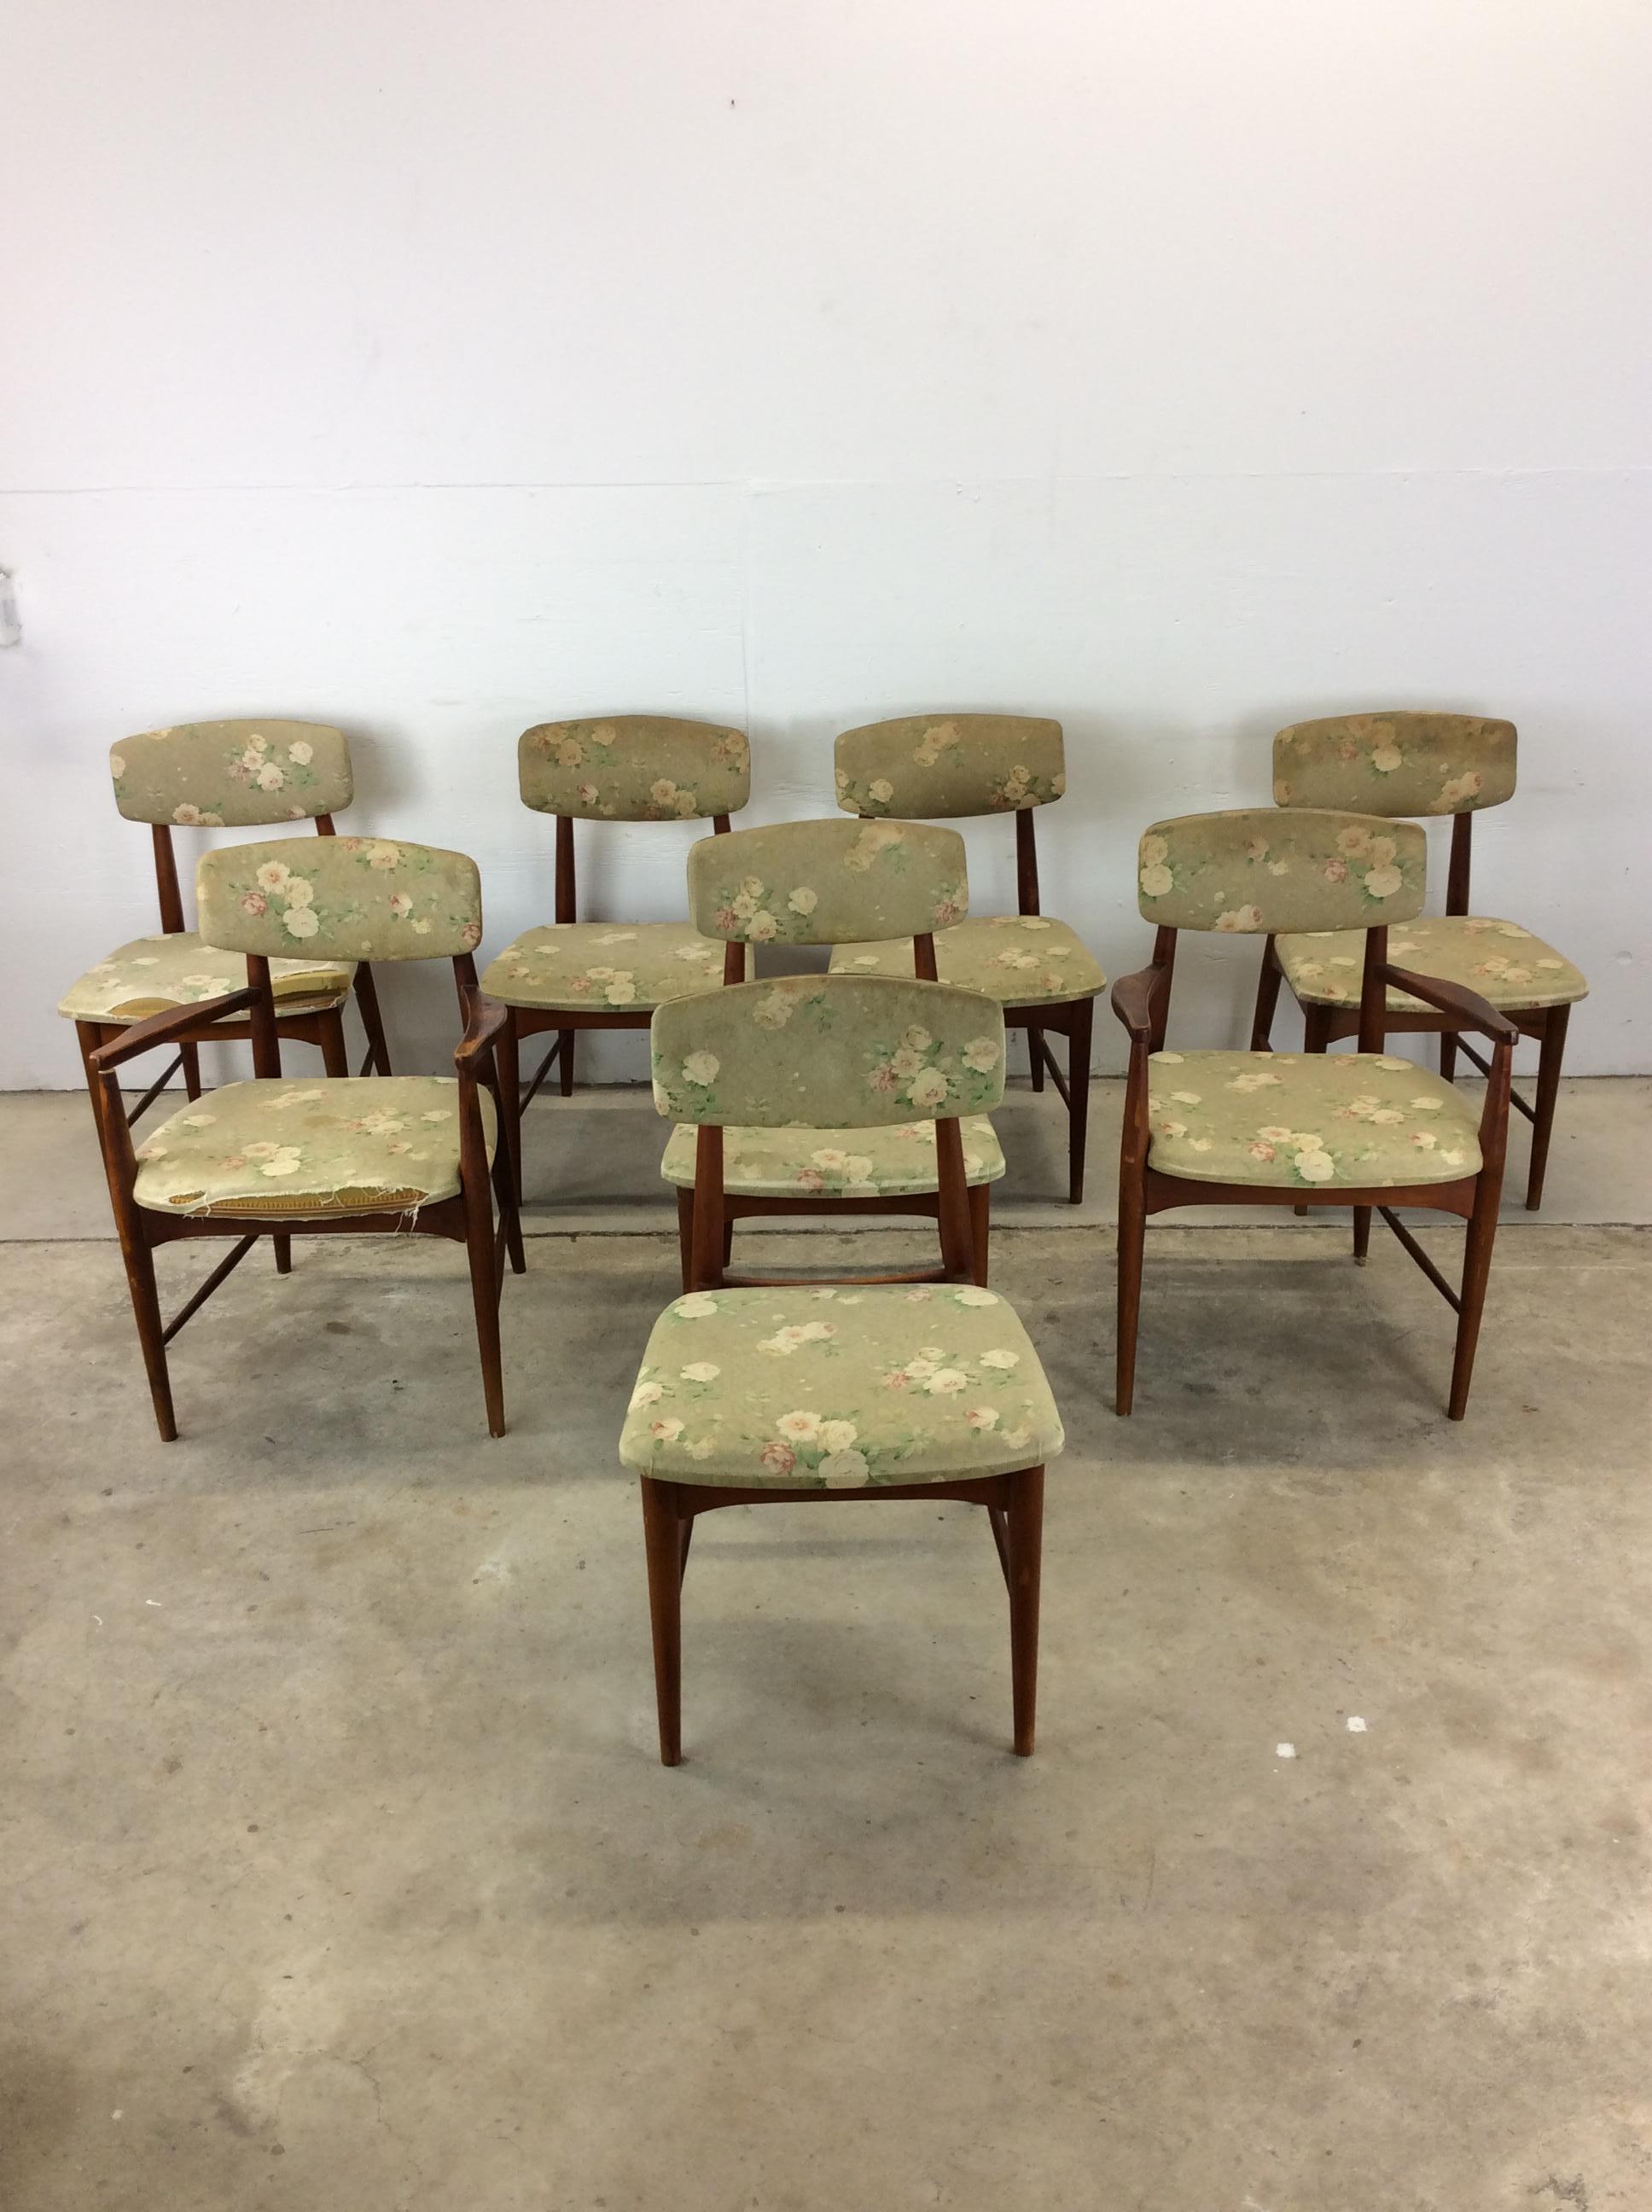 American Set of 8 Mid Century Modern Dining Room Chairs with Vintage Upholstery For Sale